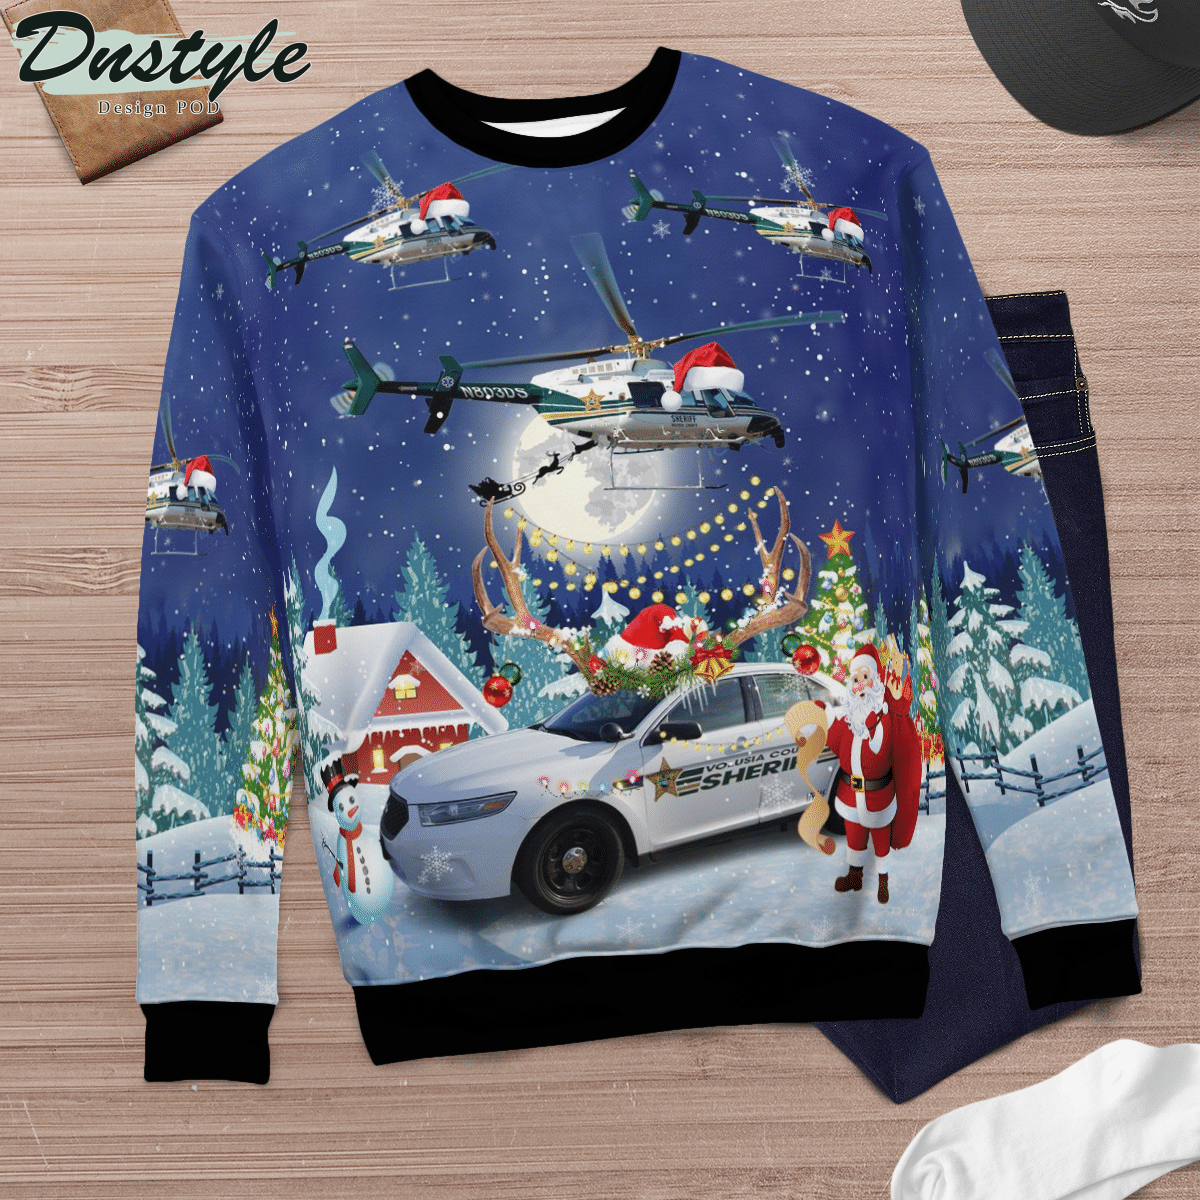 Volusia County Sheriff Bell 407 & Ford Police Interceptor Ugly Christmas Sweater